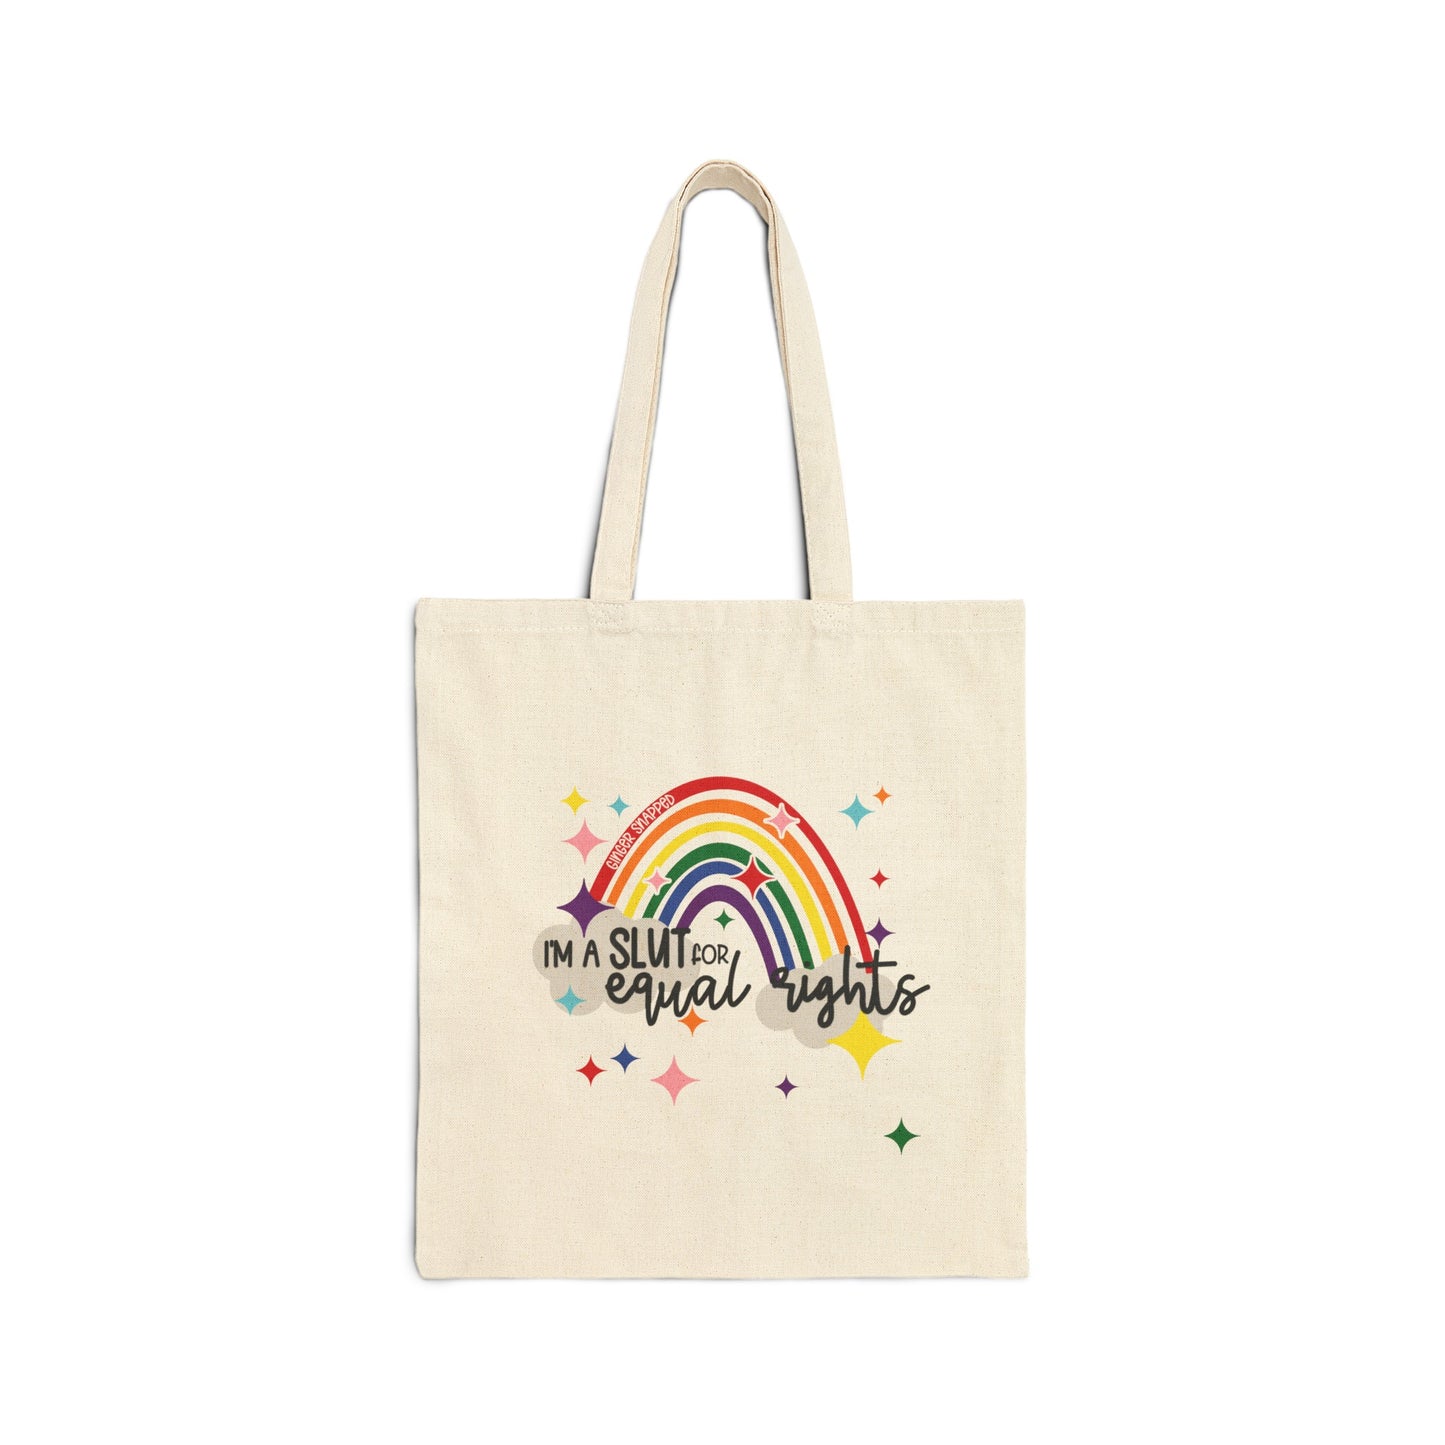 PRIDE 🌈 COLLECTION | “I'm a S*ut for Equal Rights” Cotton Canvas Tote Bag